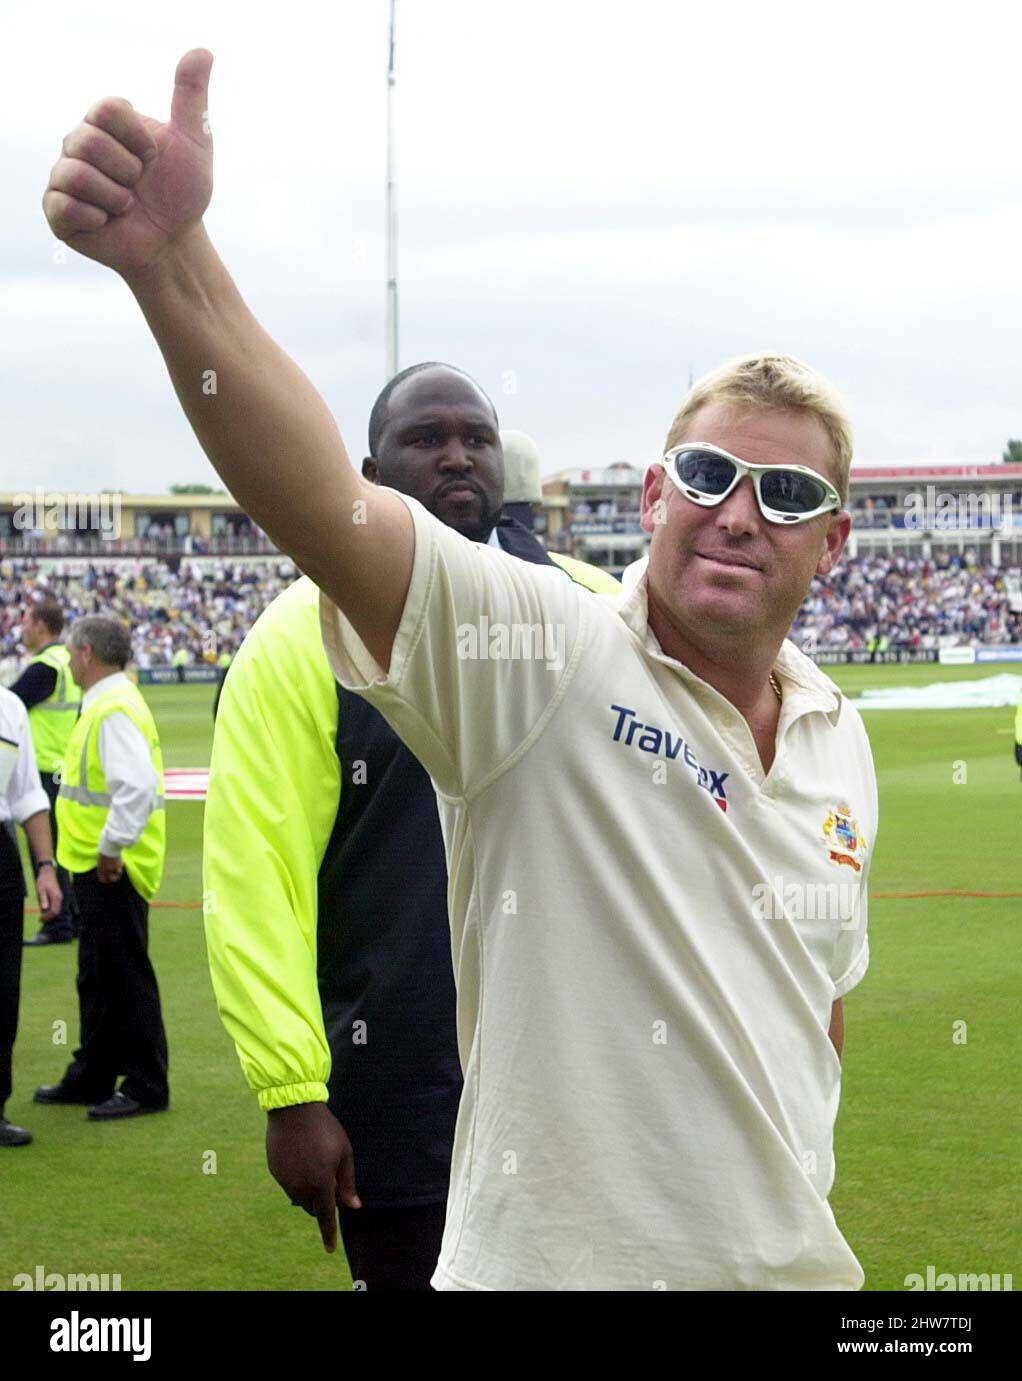 File photo dated 08-07-2001 of Australia's Shane Warne waves to the crowd, after the victory over England in the First Test match at Edgbaston, Birmingham. Former Australia cricketer Shane Warne has died at the age of 52, his management company MPC Entertainment has announced in a statement. Issue date: Friday March 4, 2022. Stock Photo